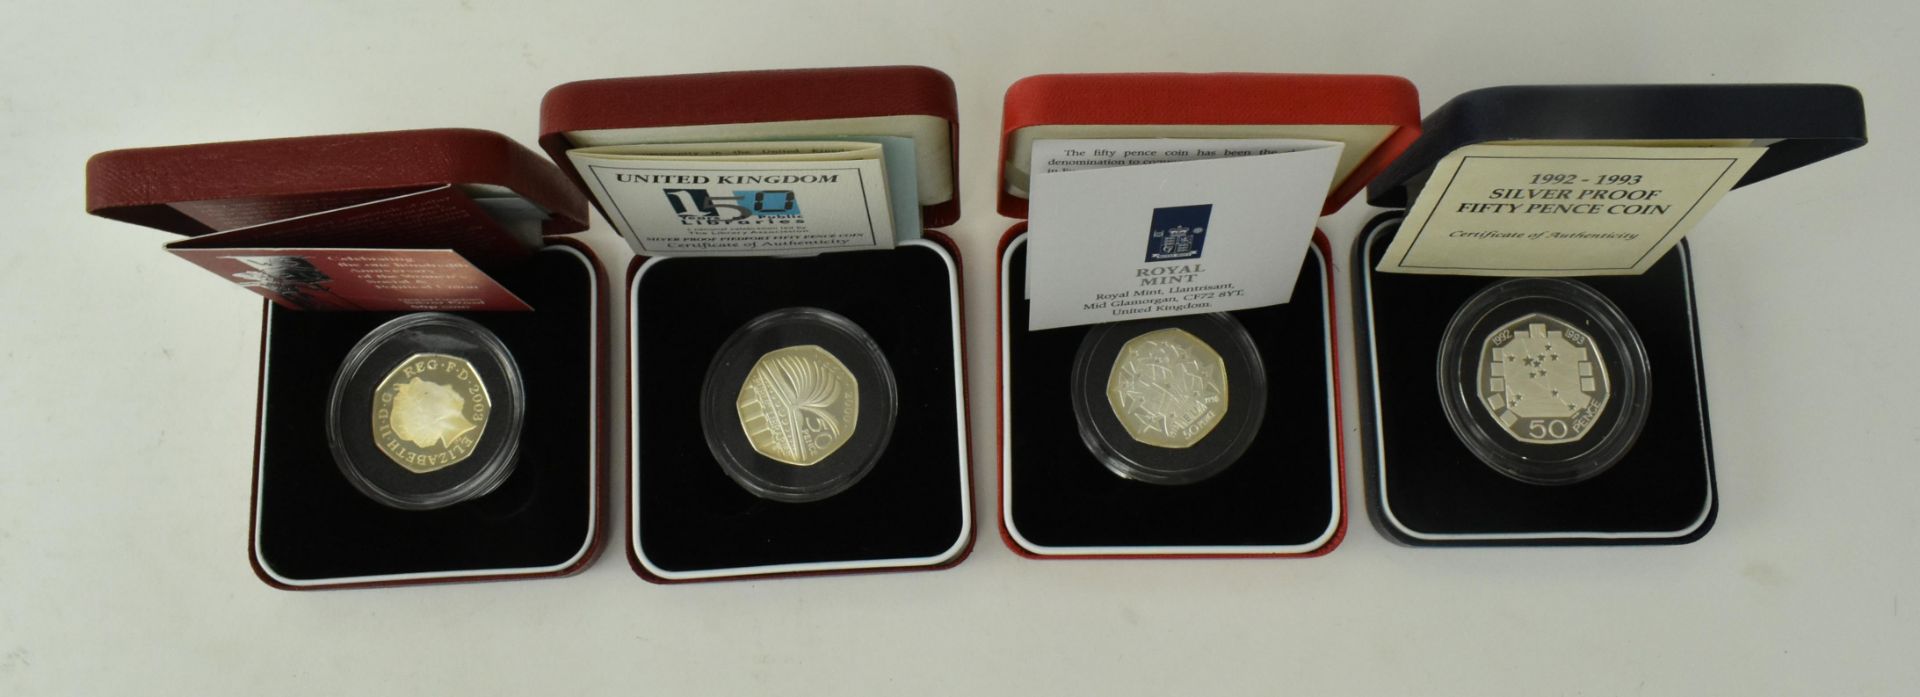 SEVEN ROYAL MINT COMMEMORATIVE FIFTY PENCE COINS - Image 3 of 4